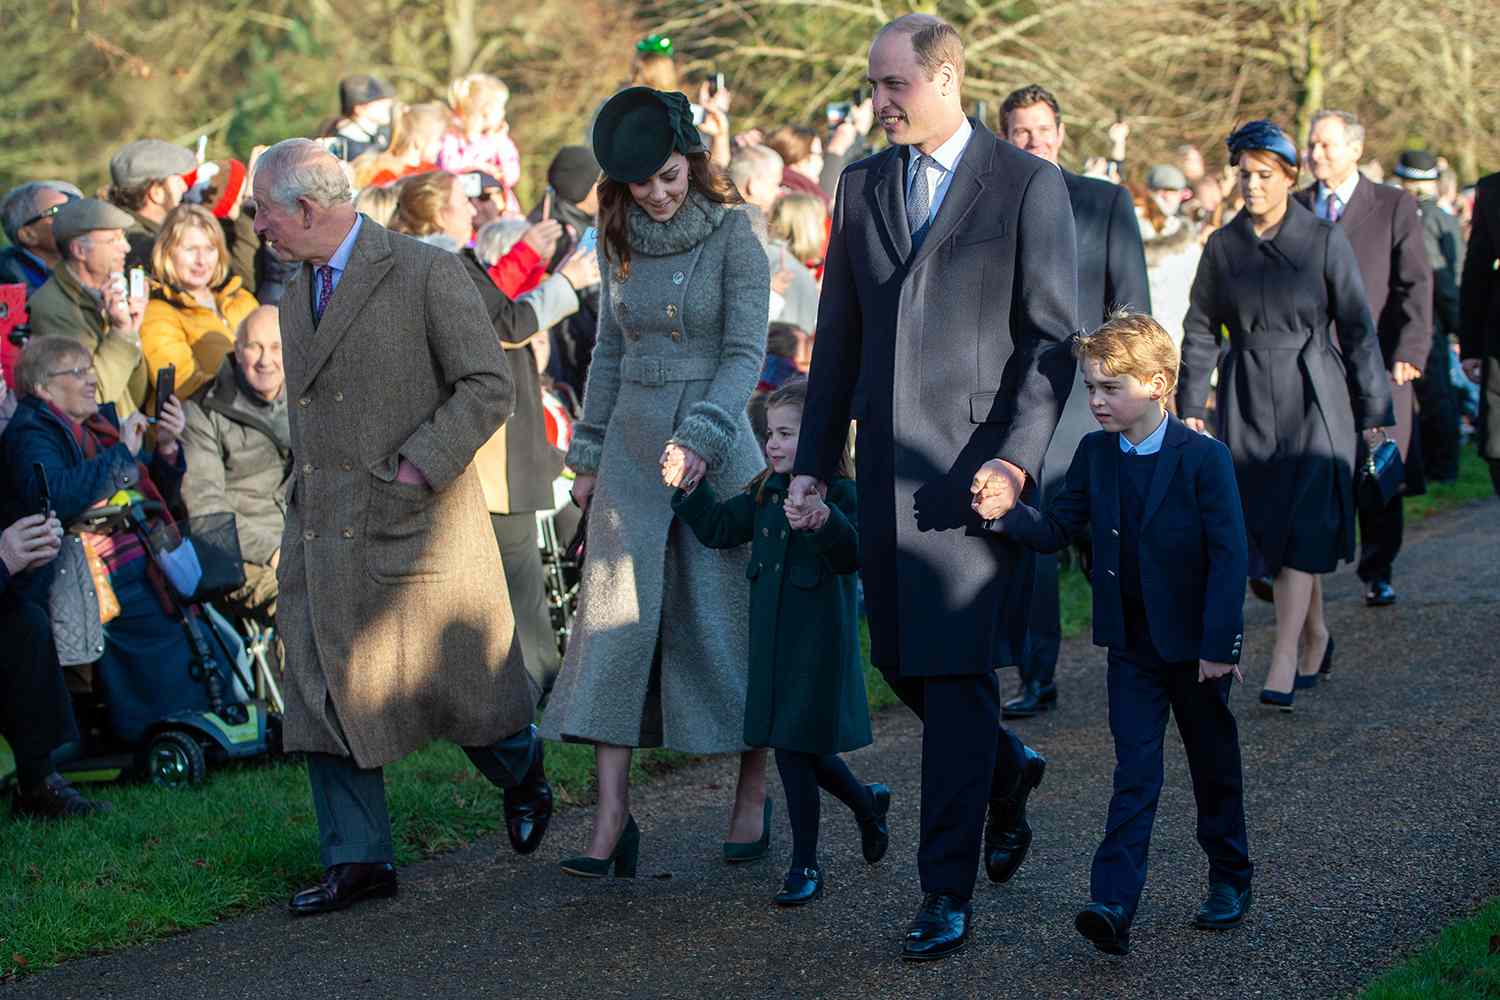 The Prince of Wales, The Duke and Duchess of Cambridge and their children Prince George and Princess Charlotte arriving to attend the Christmas Day morning church service at St Mary Magdalene Church in Sandringham, Norfolk. (Photo by Joe Giddens/PA Images via Getty Images)